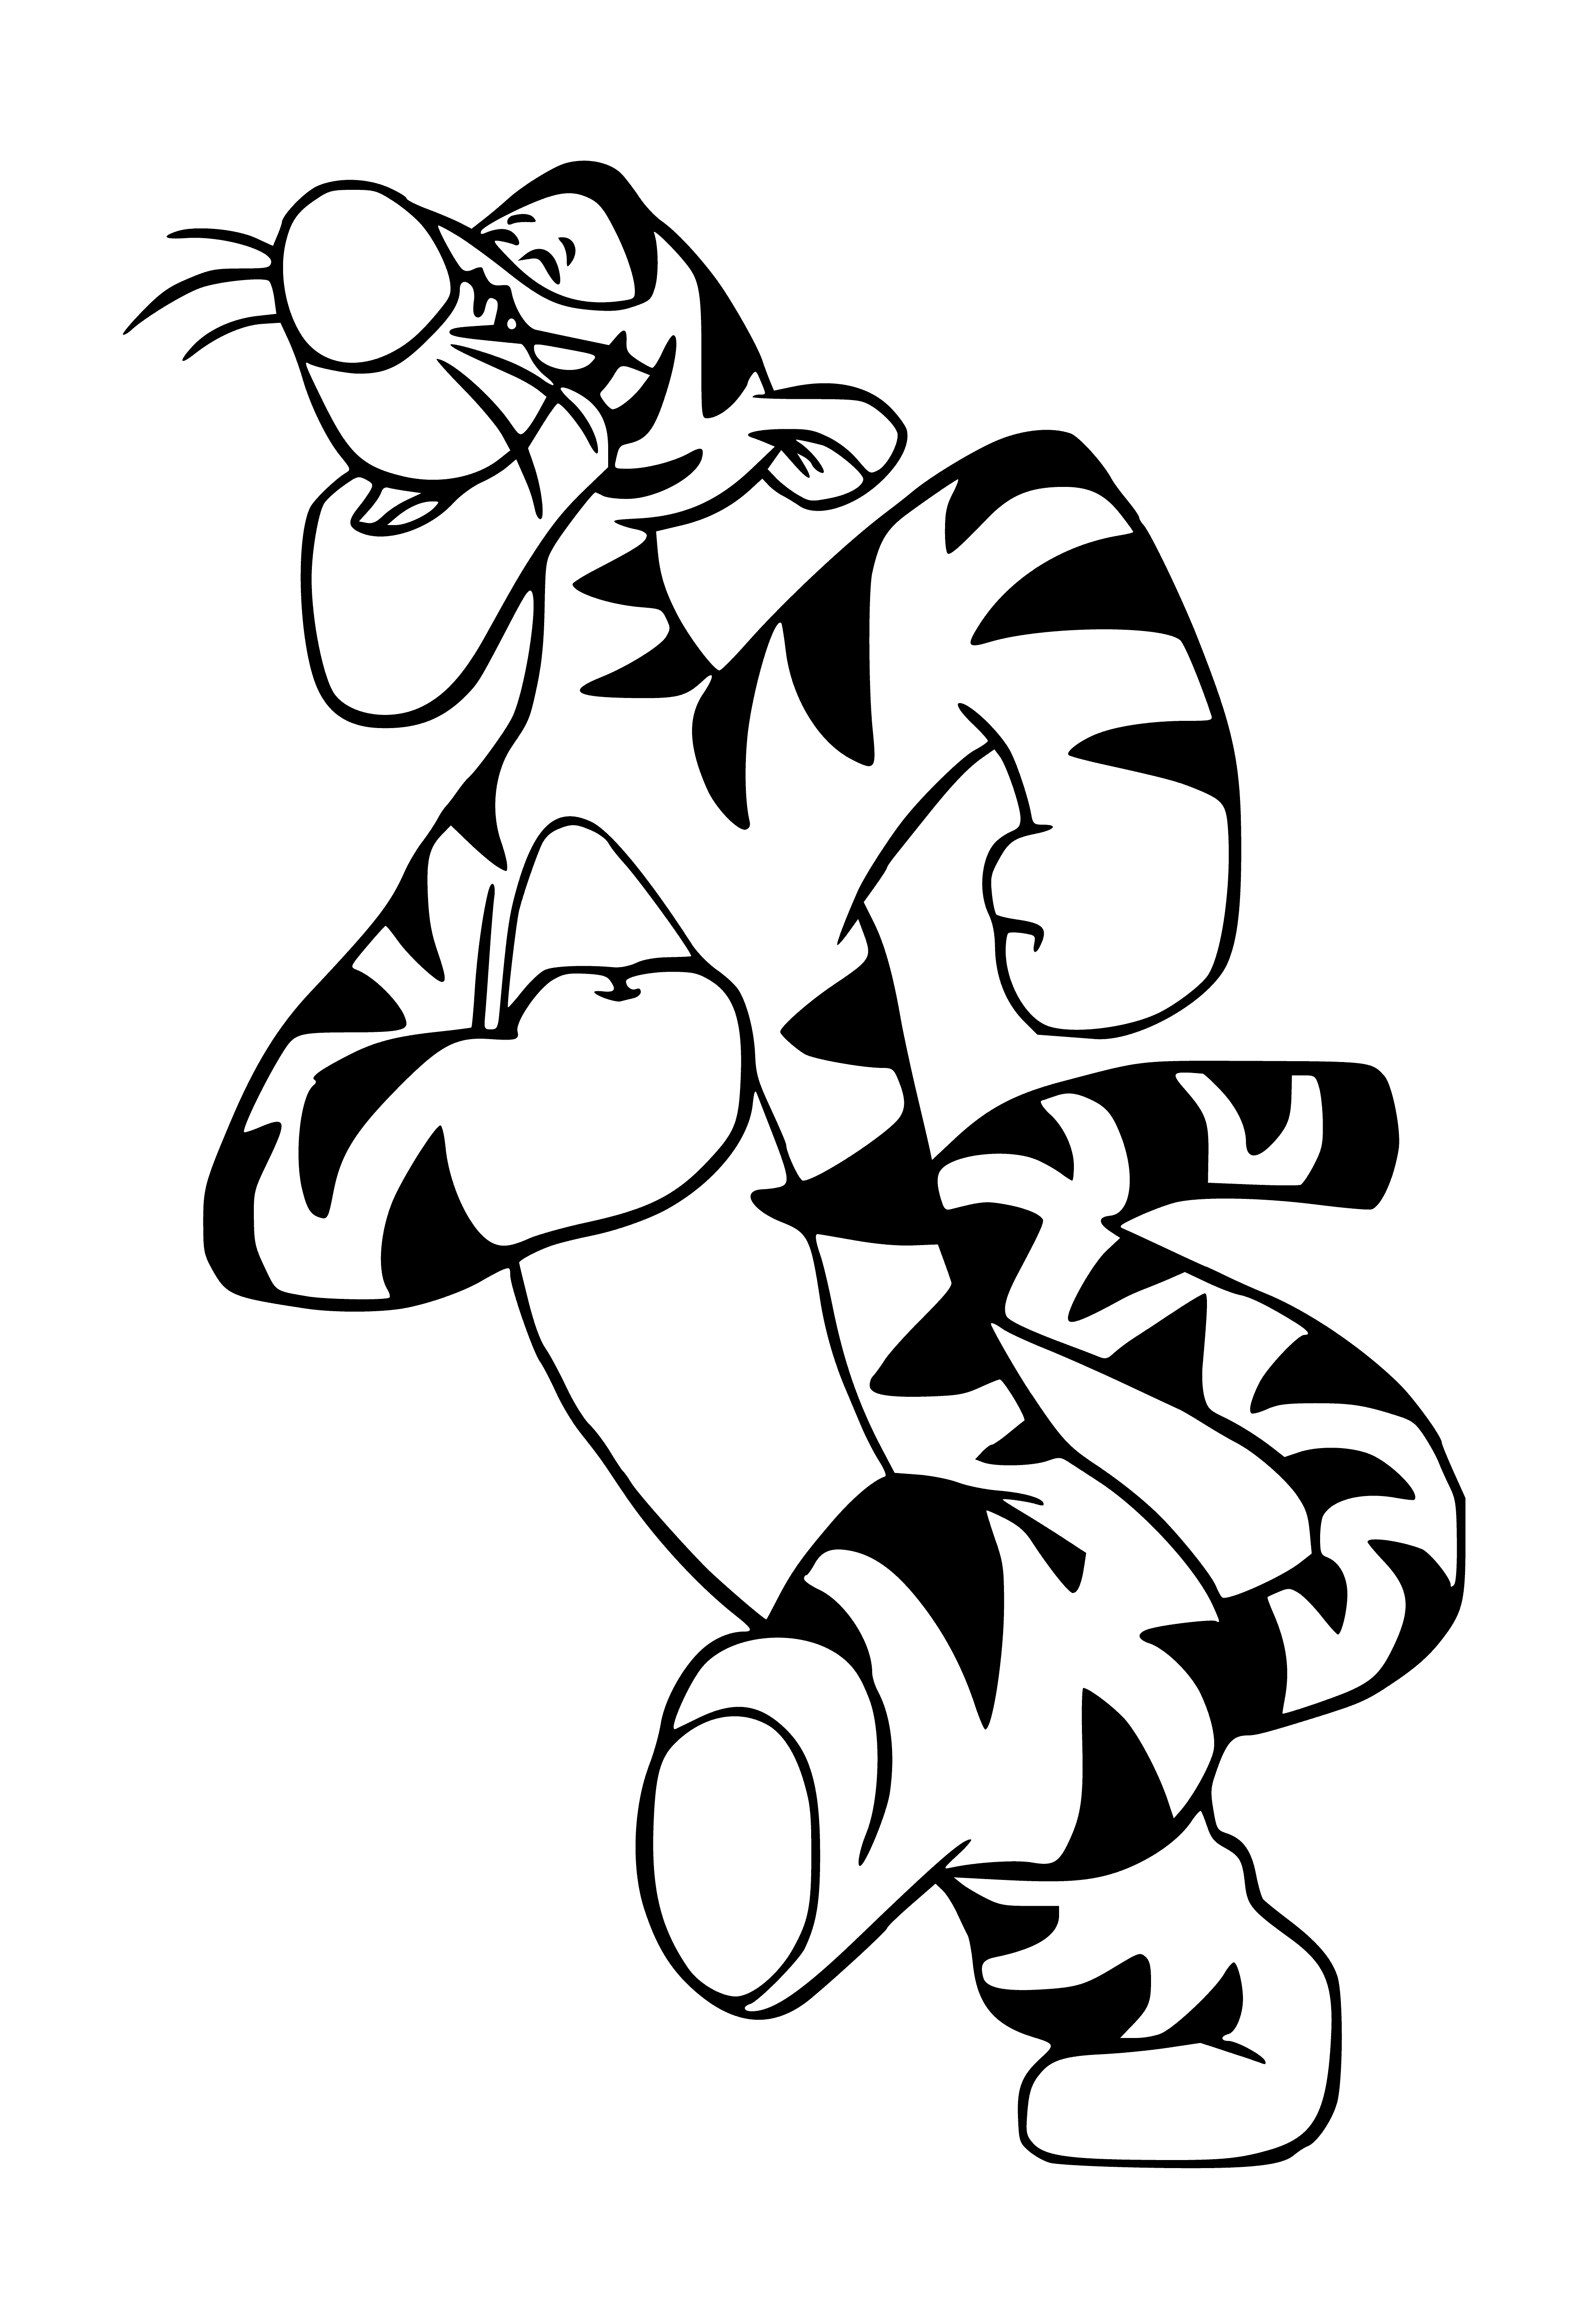 coloring page: Tiger with orange fur and black stripes stands on rock in river, looking at the camera in coloring page.